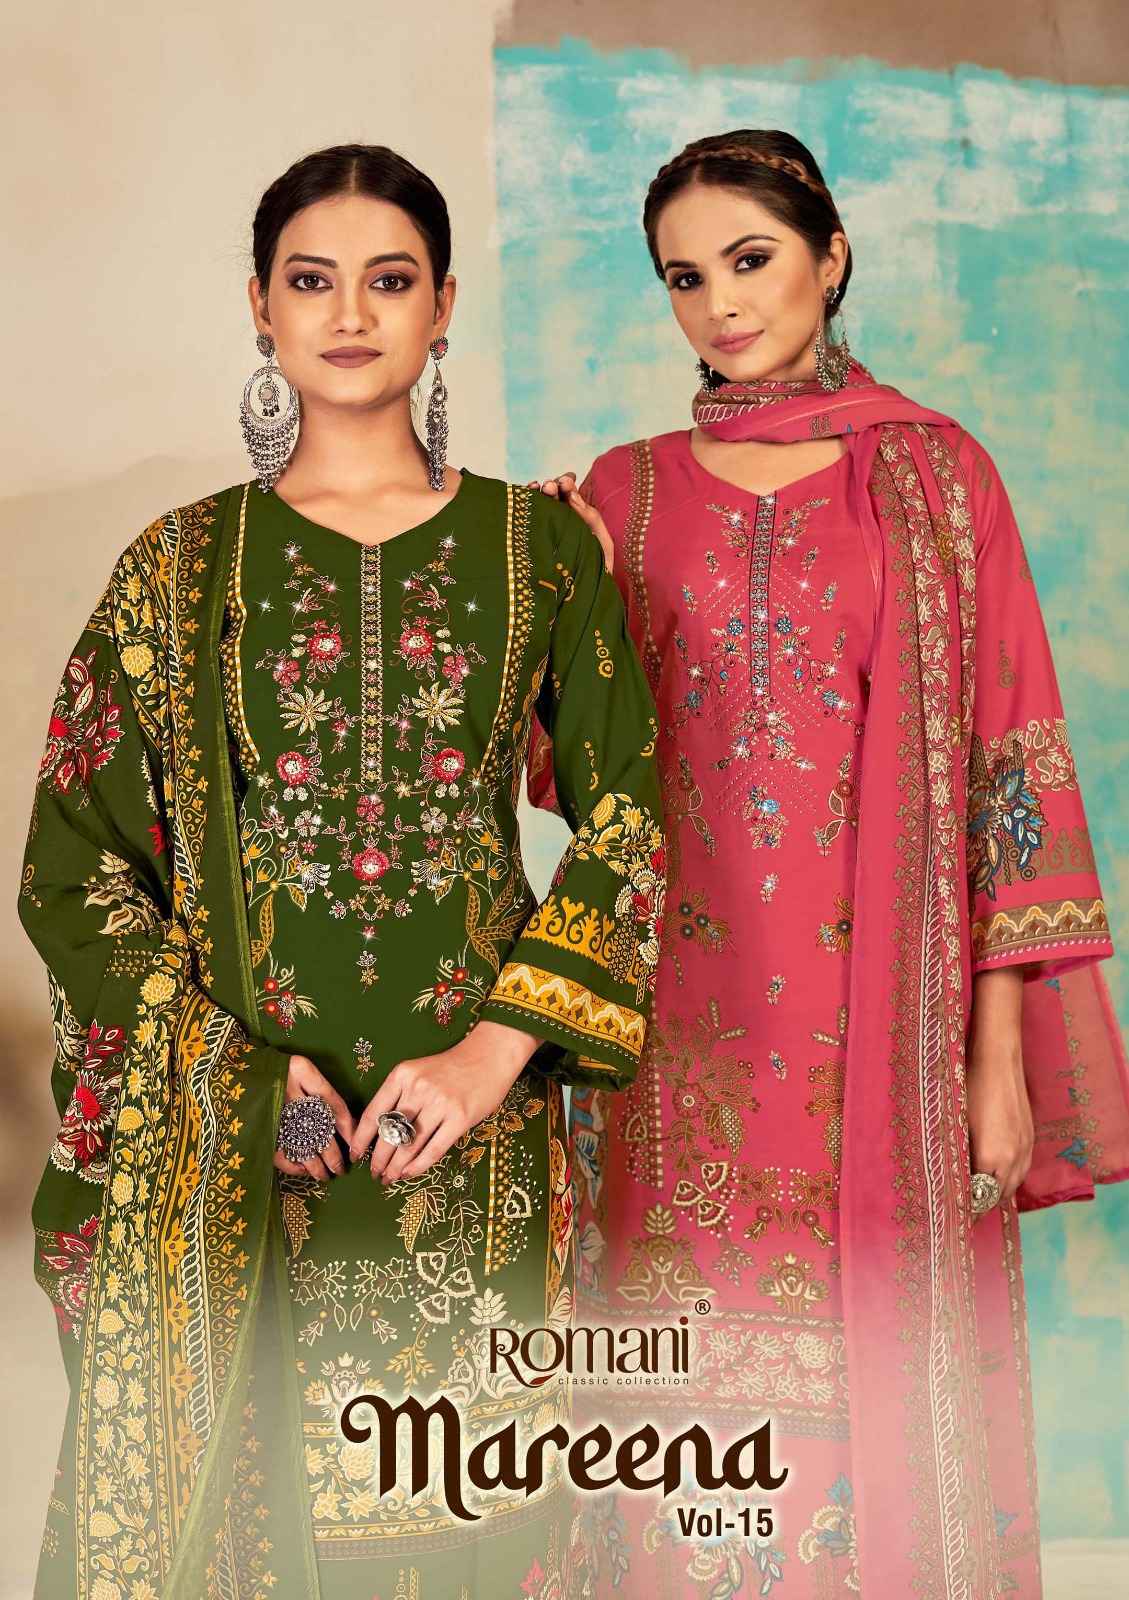 ROMANI MAREENA VOL 15 COTTON DIGITAL PRINTS WITH FANCY EMBROIDERY WORK SUITS